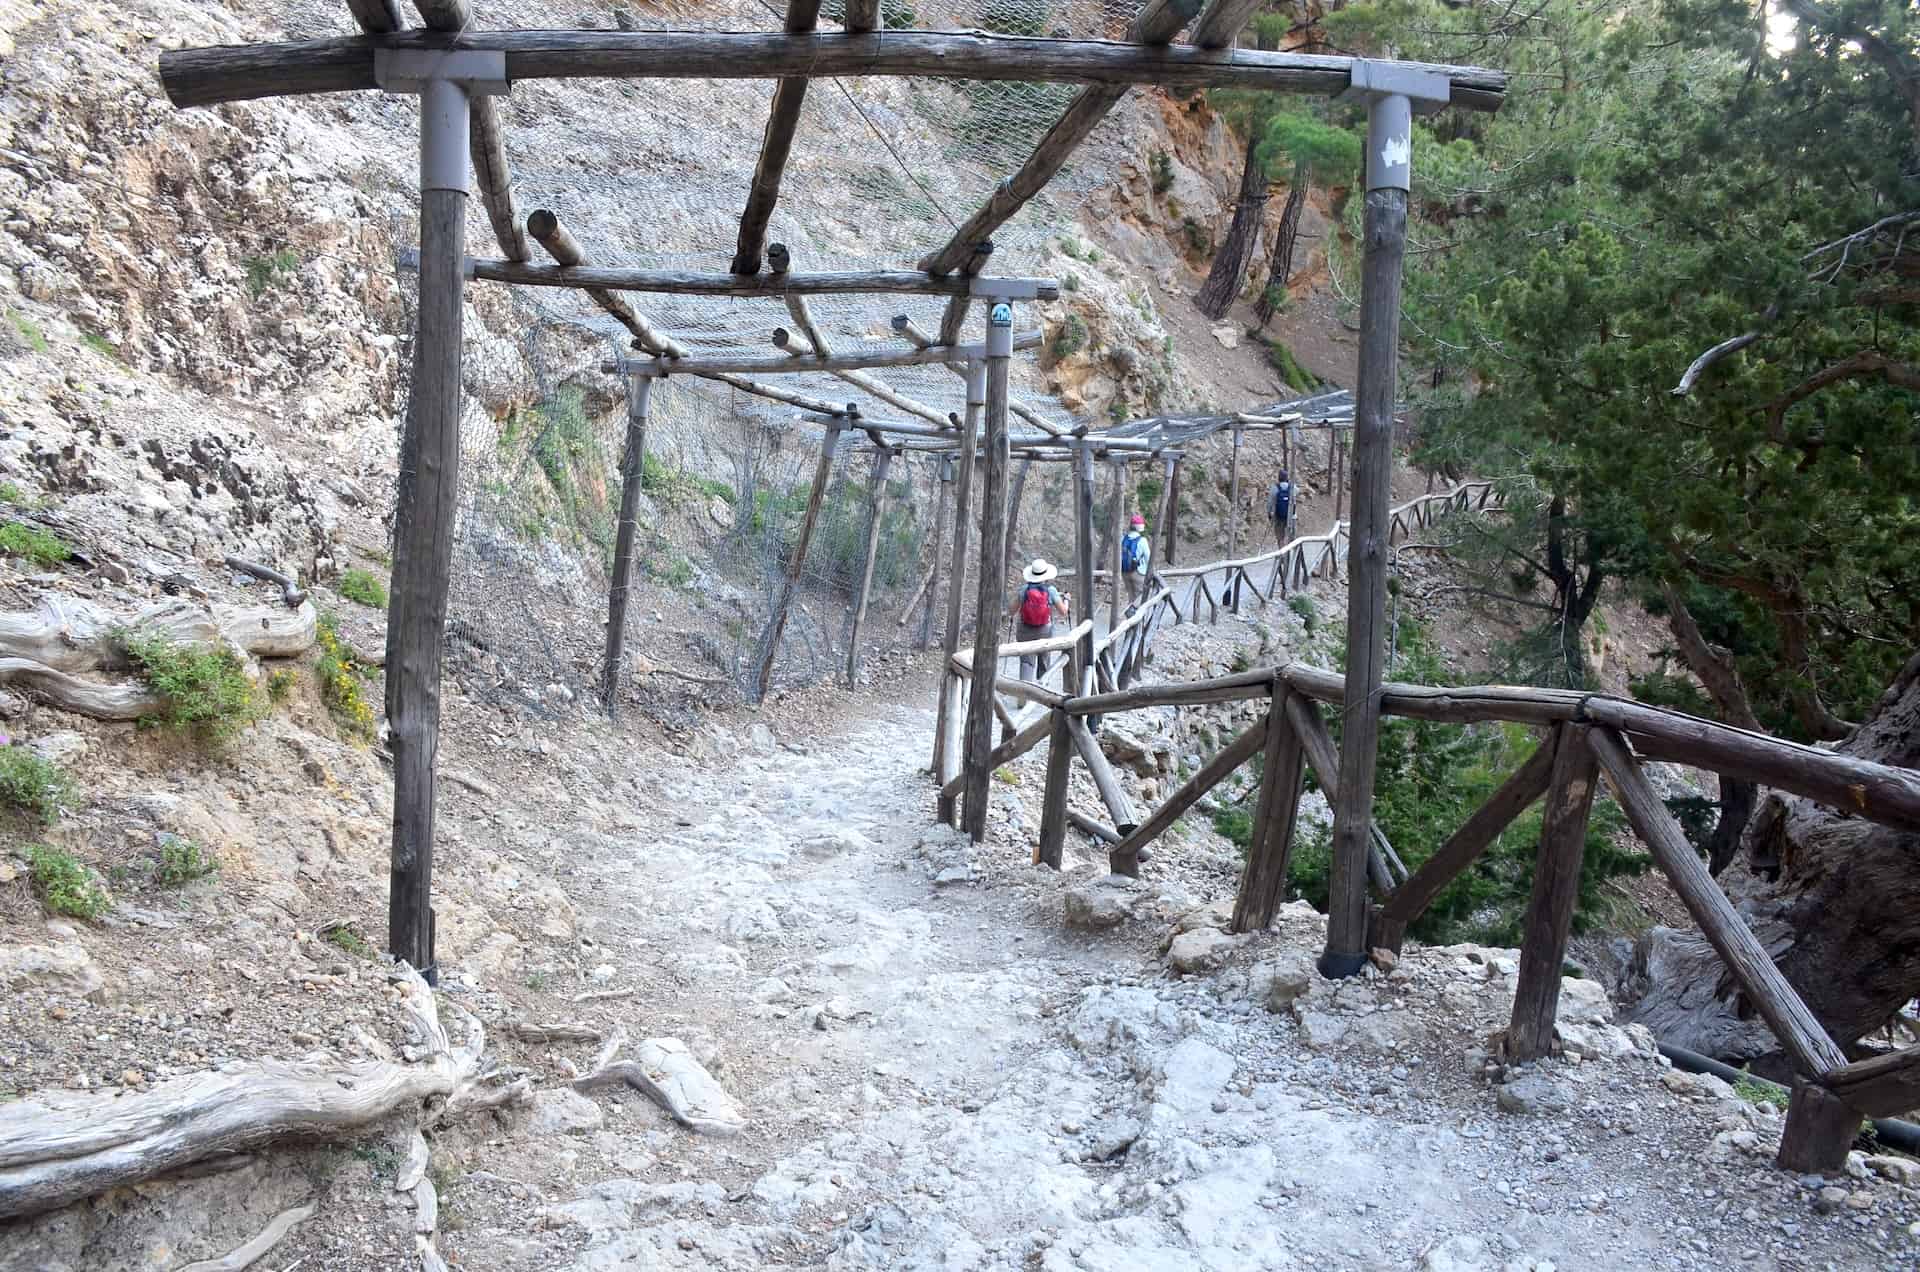 Walking under a canopy built to protect from falling rocks at Xyloskalo at the Samaria Gorge in Crete, Greece